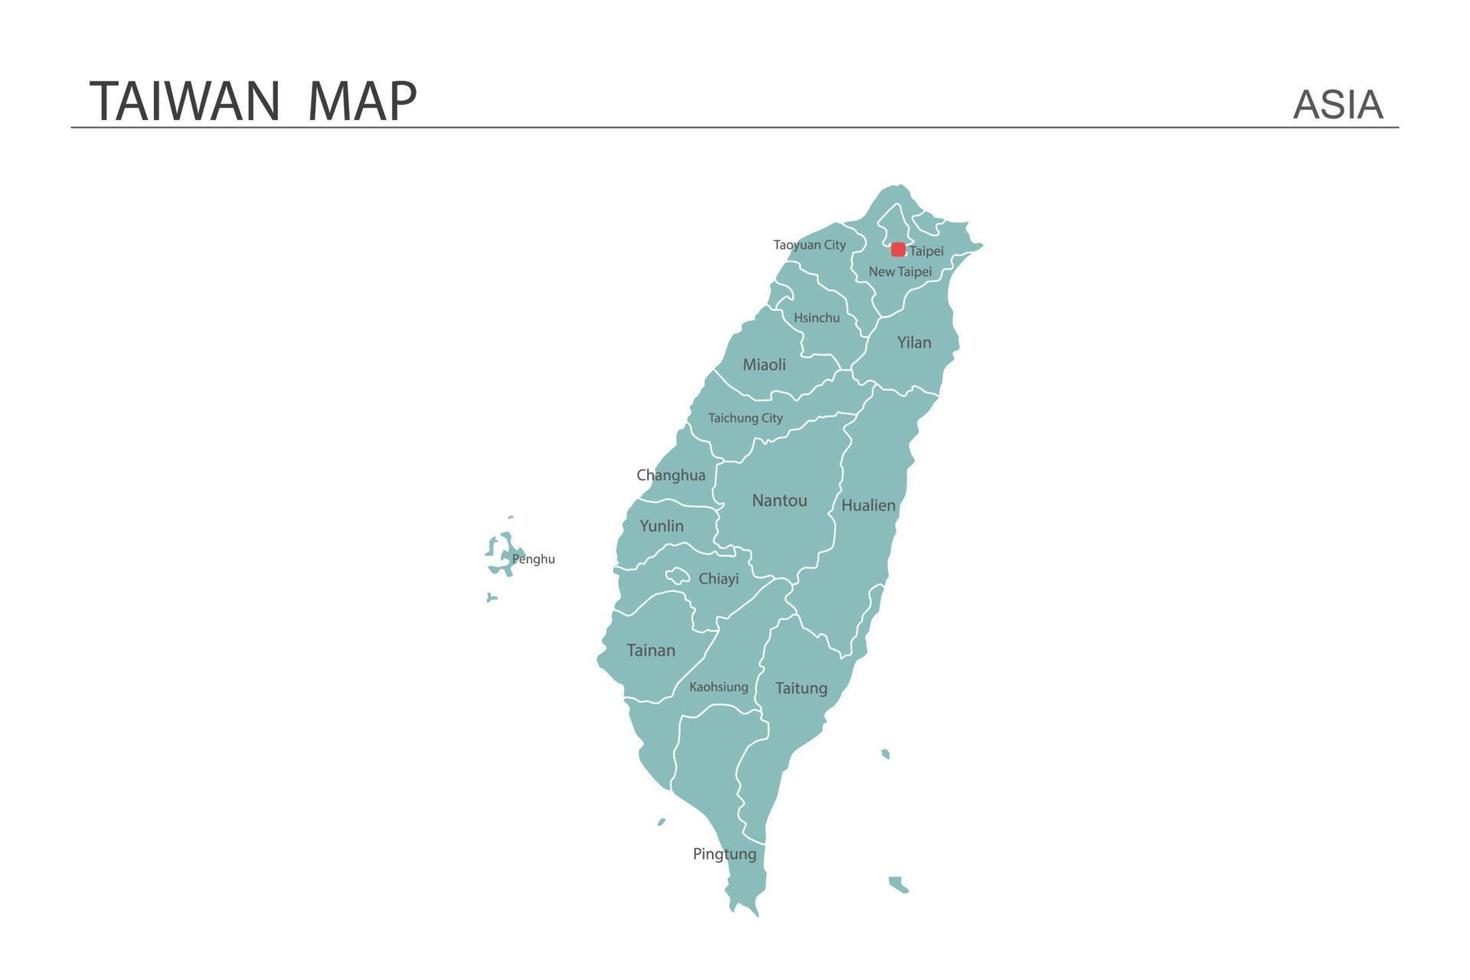 Taiwan map vector illustration on white background. Map have all province and mark the capital city of Taiwan.